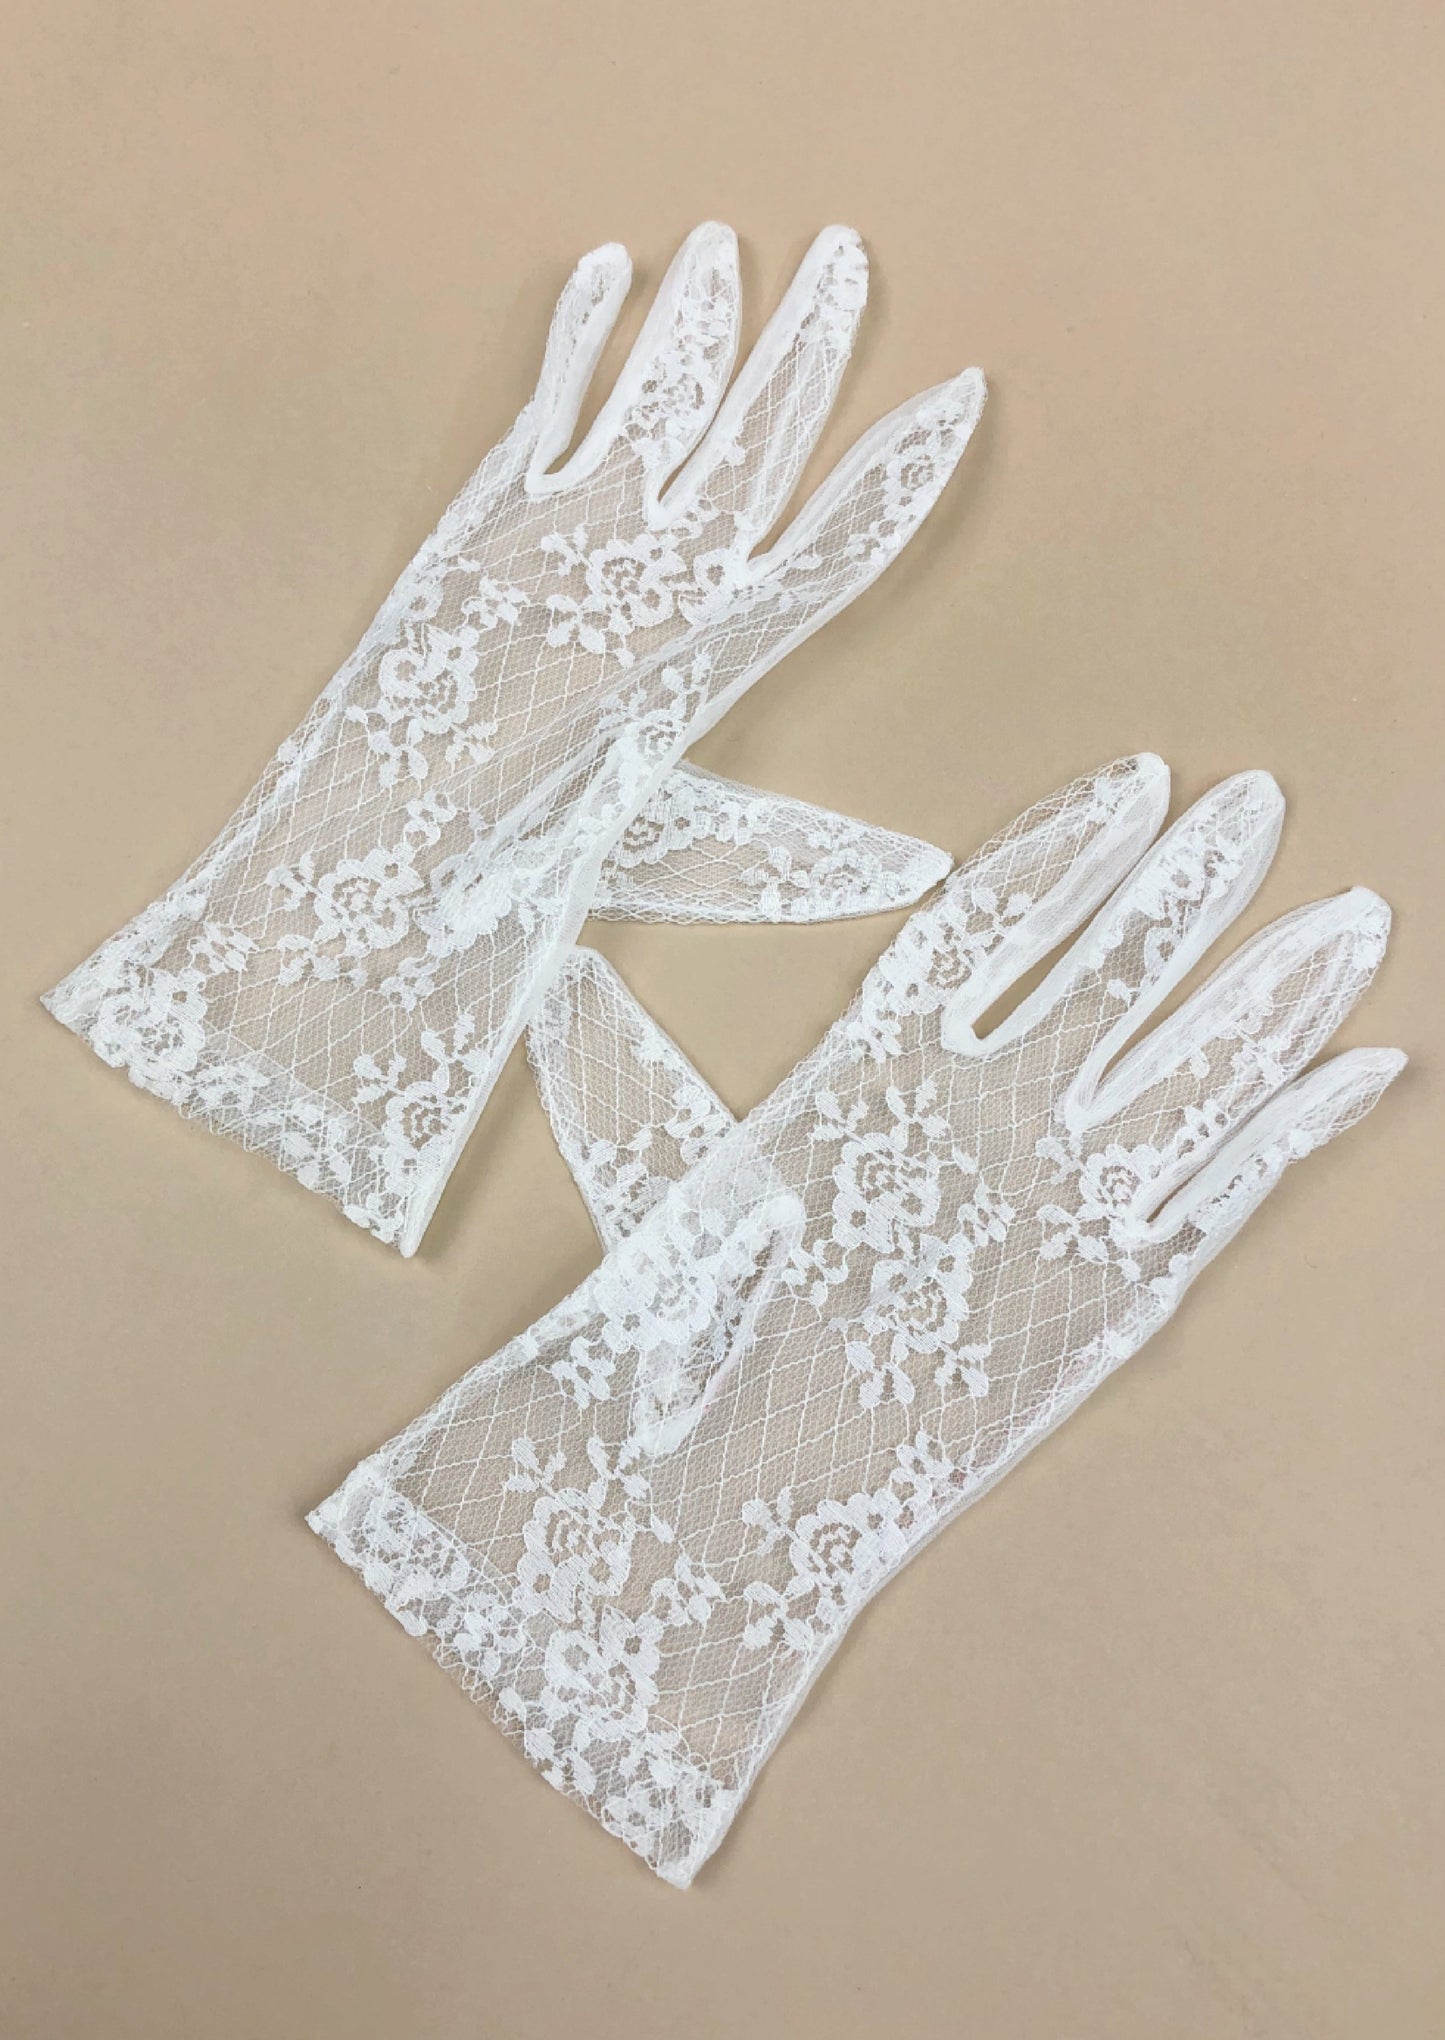 sheer white gloves with rose lace design